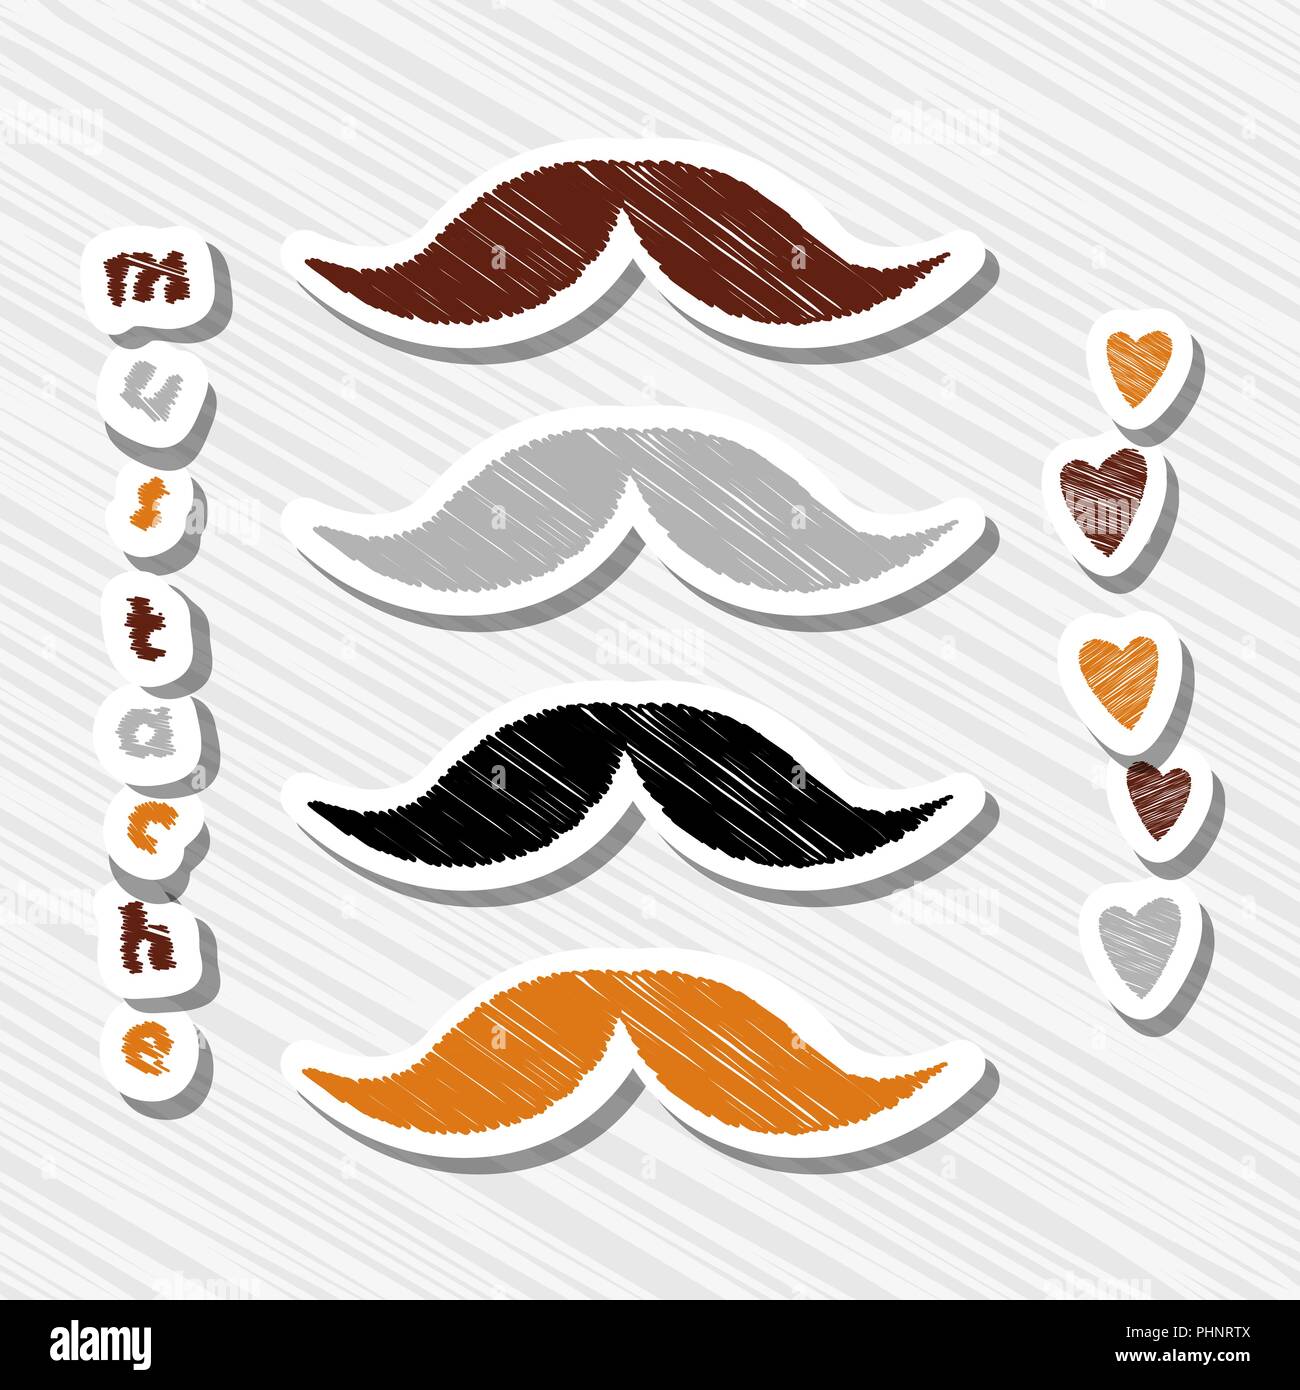 Set of mustaches on abstract background. Stock Vector